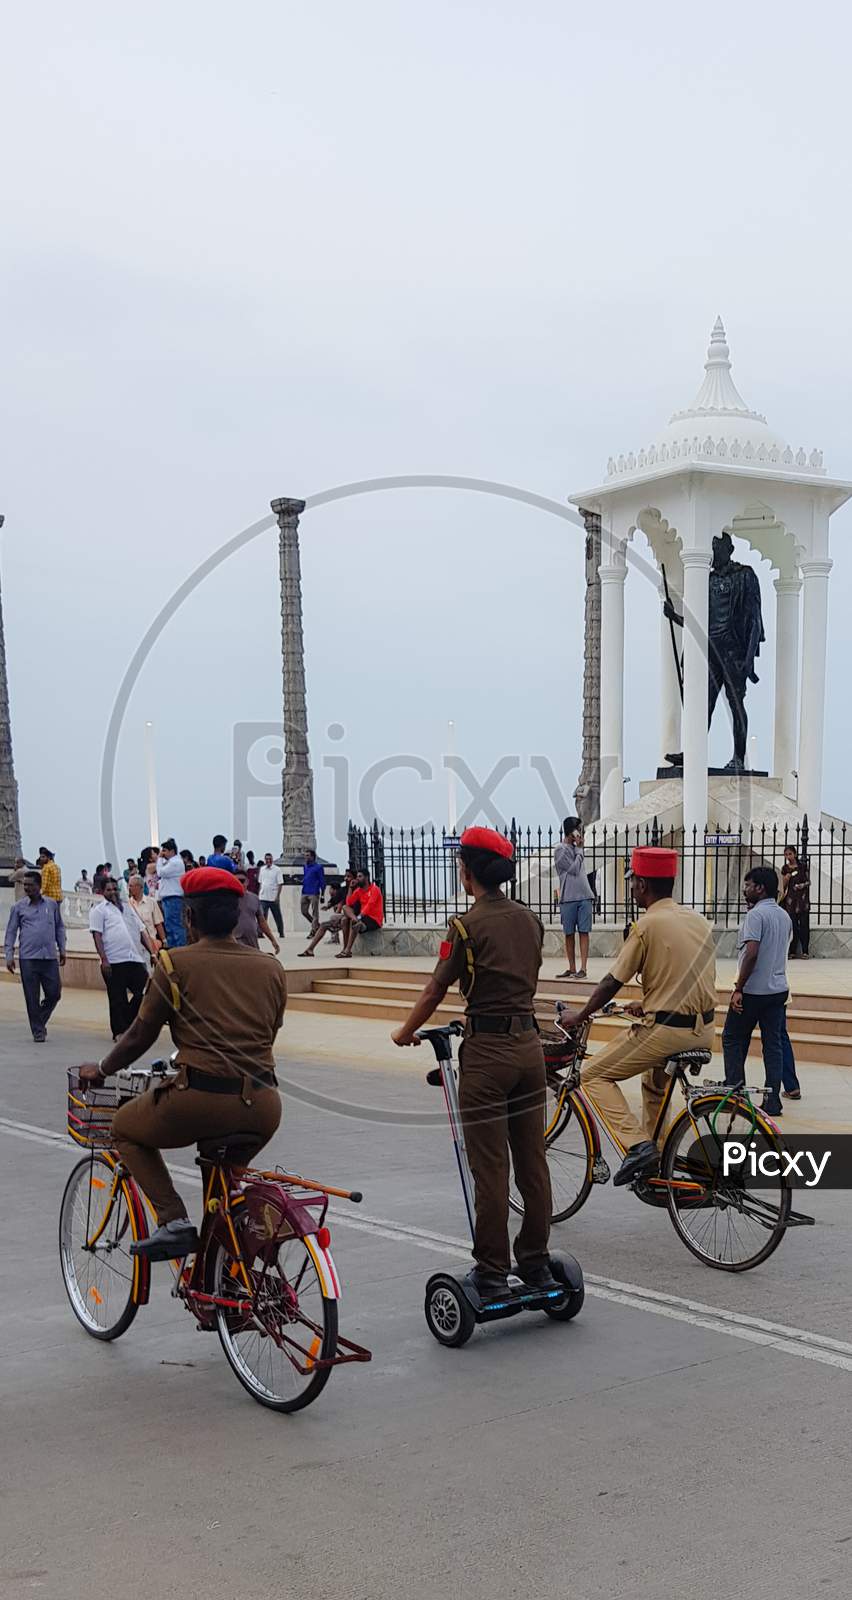 Pondicherry, India - 11 August 2018: A portrait photo of a cops riding bicycle and segway at a beach as a passerby and public look at them.